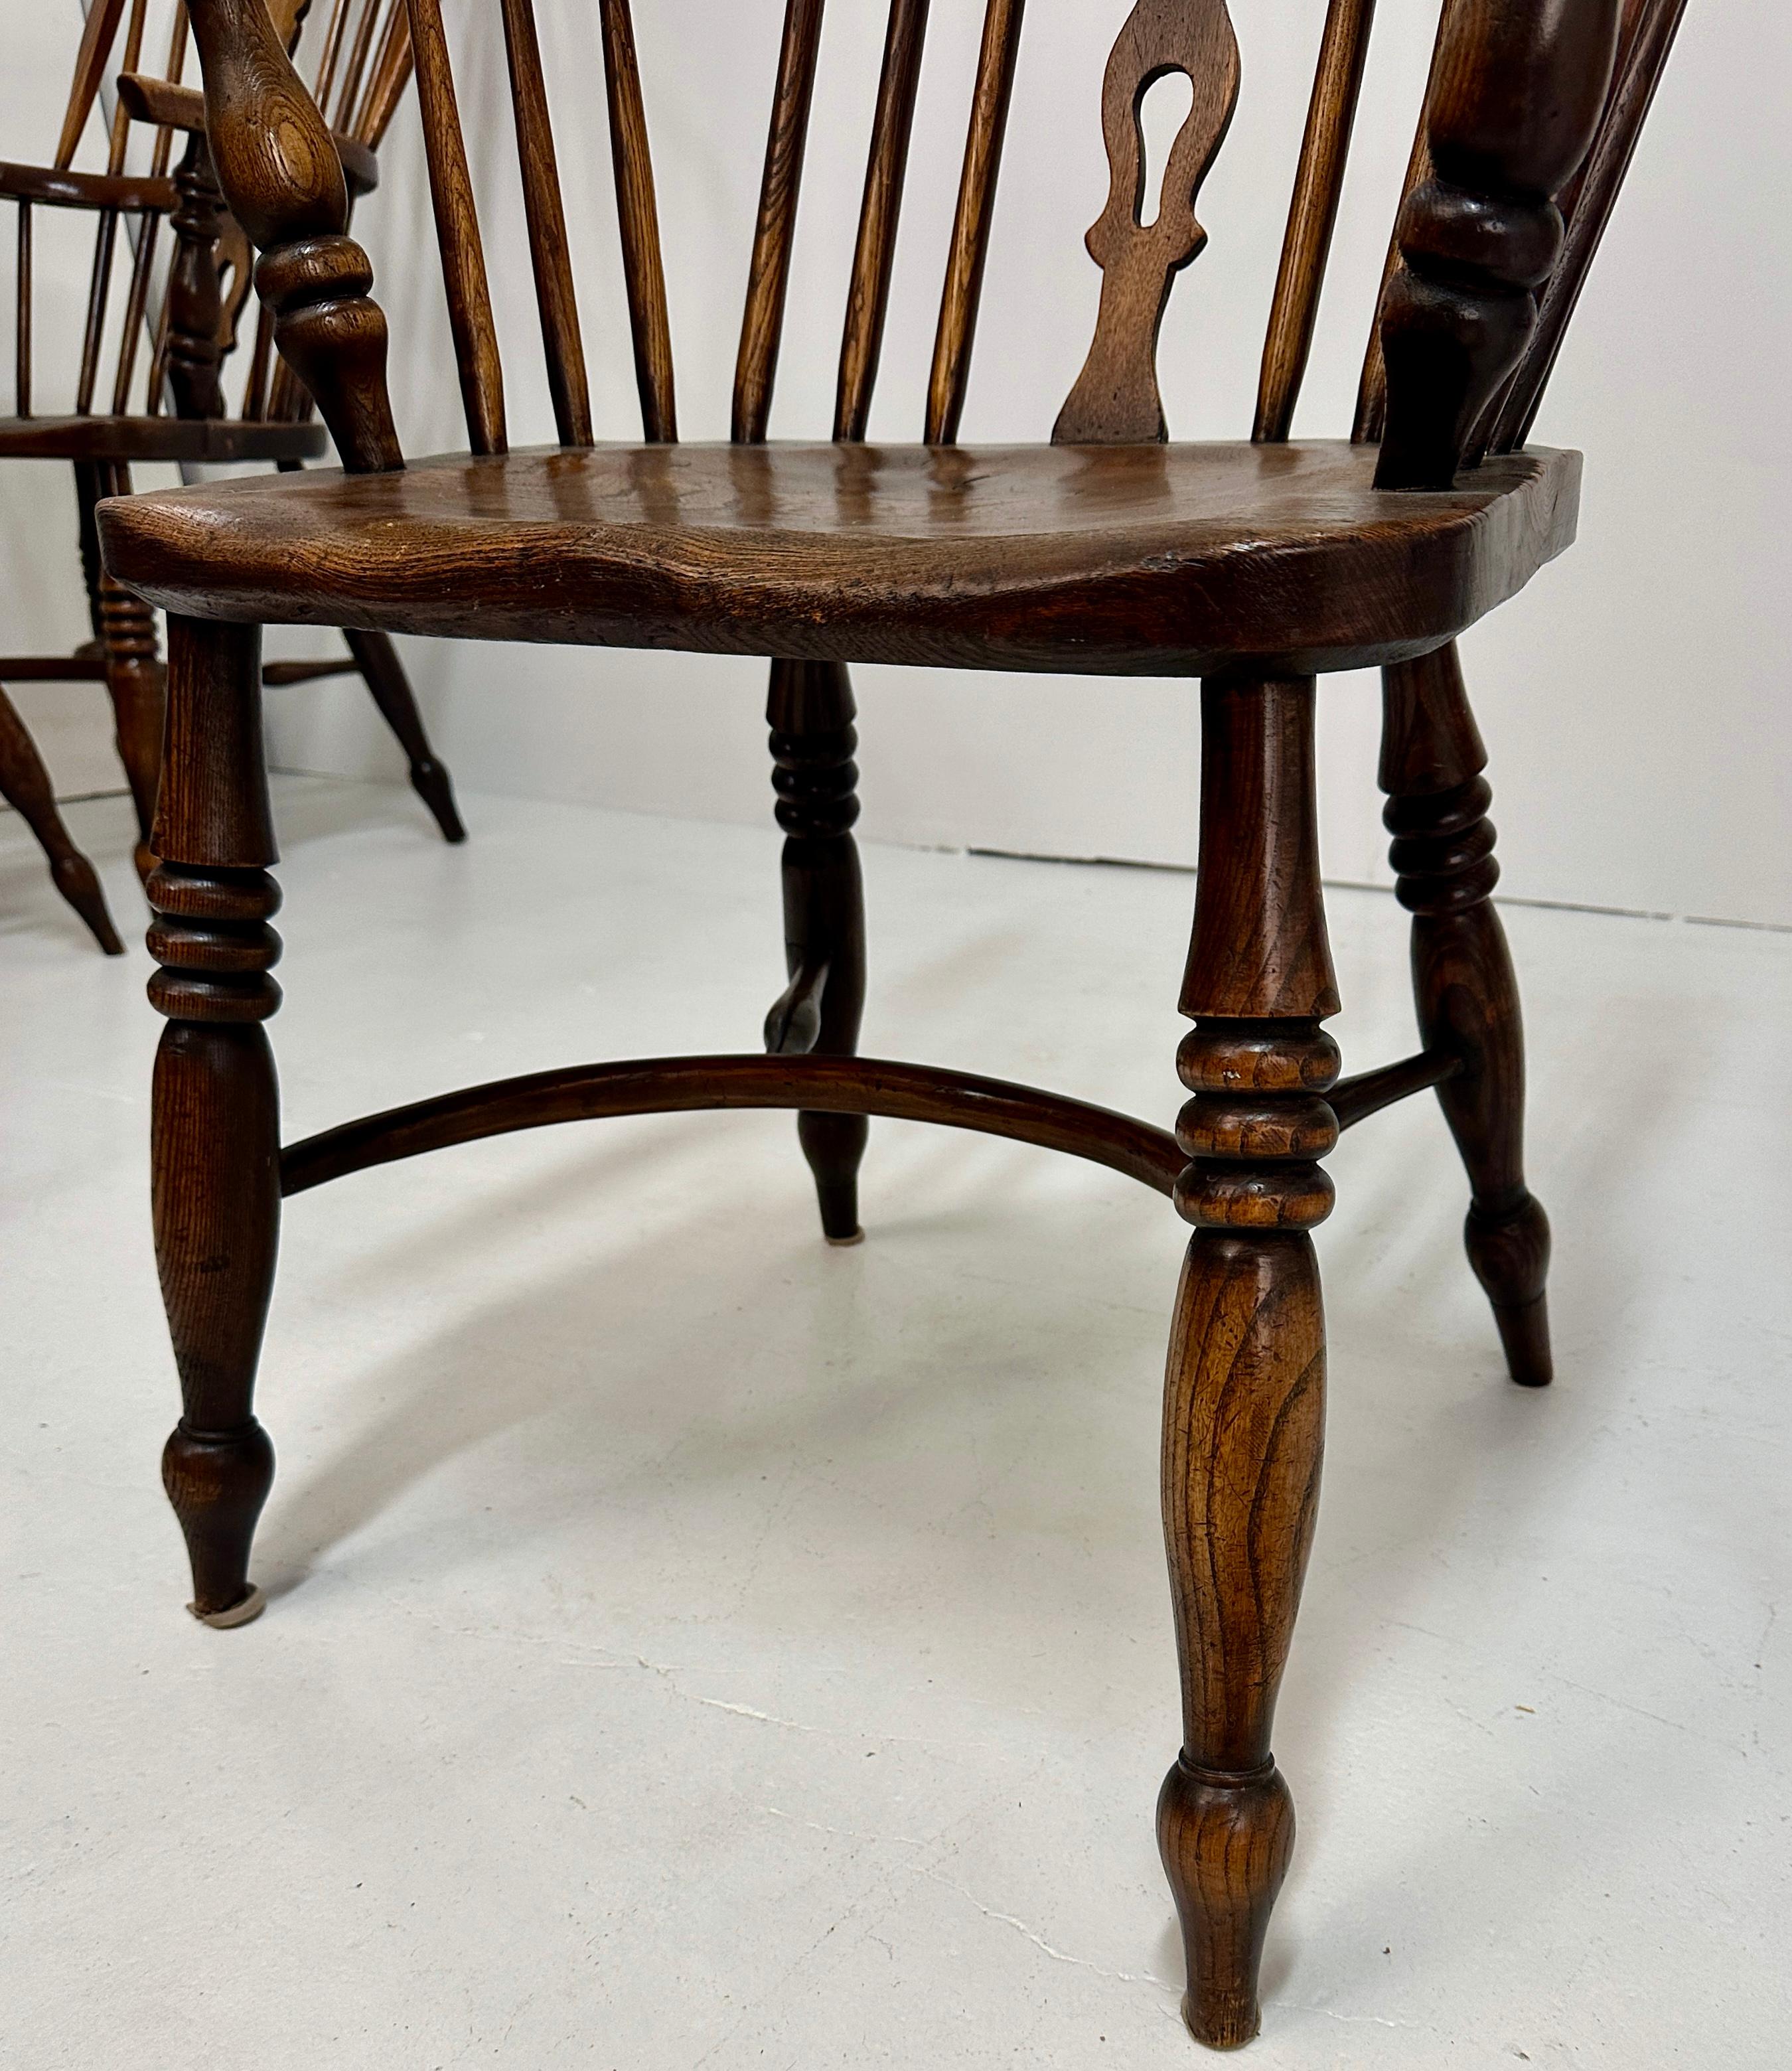 19th C English Oak Windsor Chairs - Set of Six For Sale 7